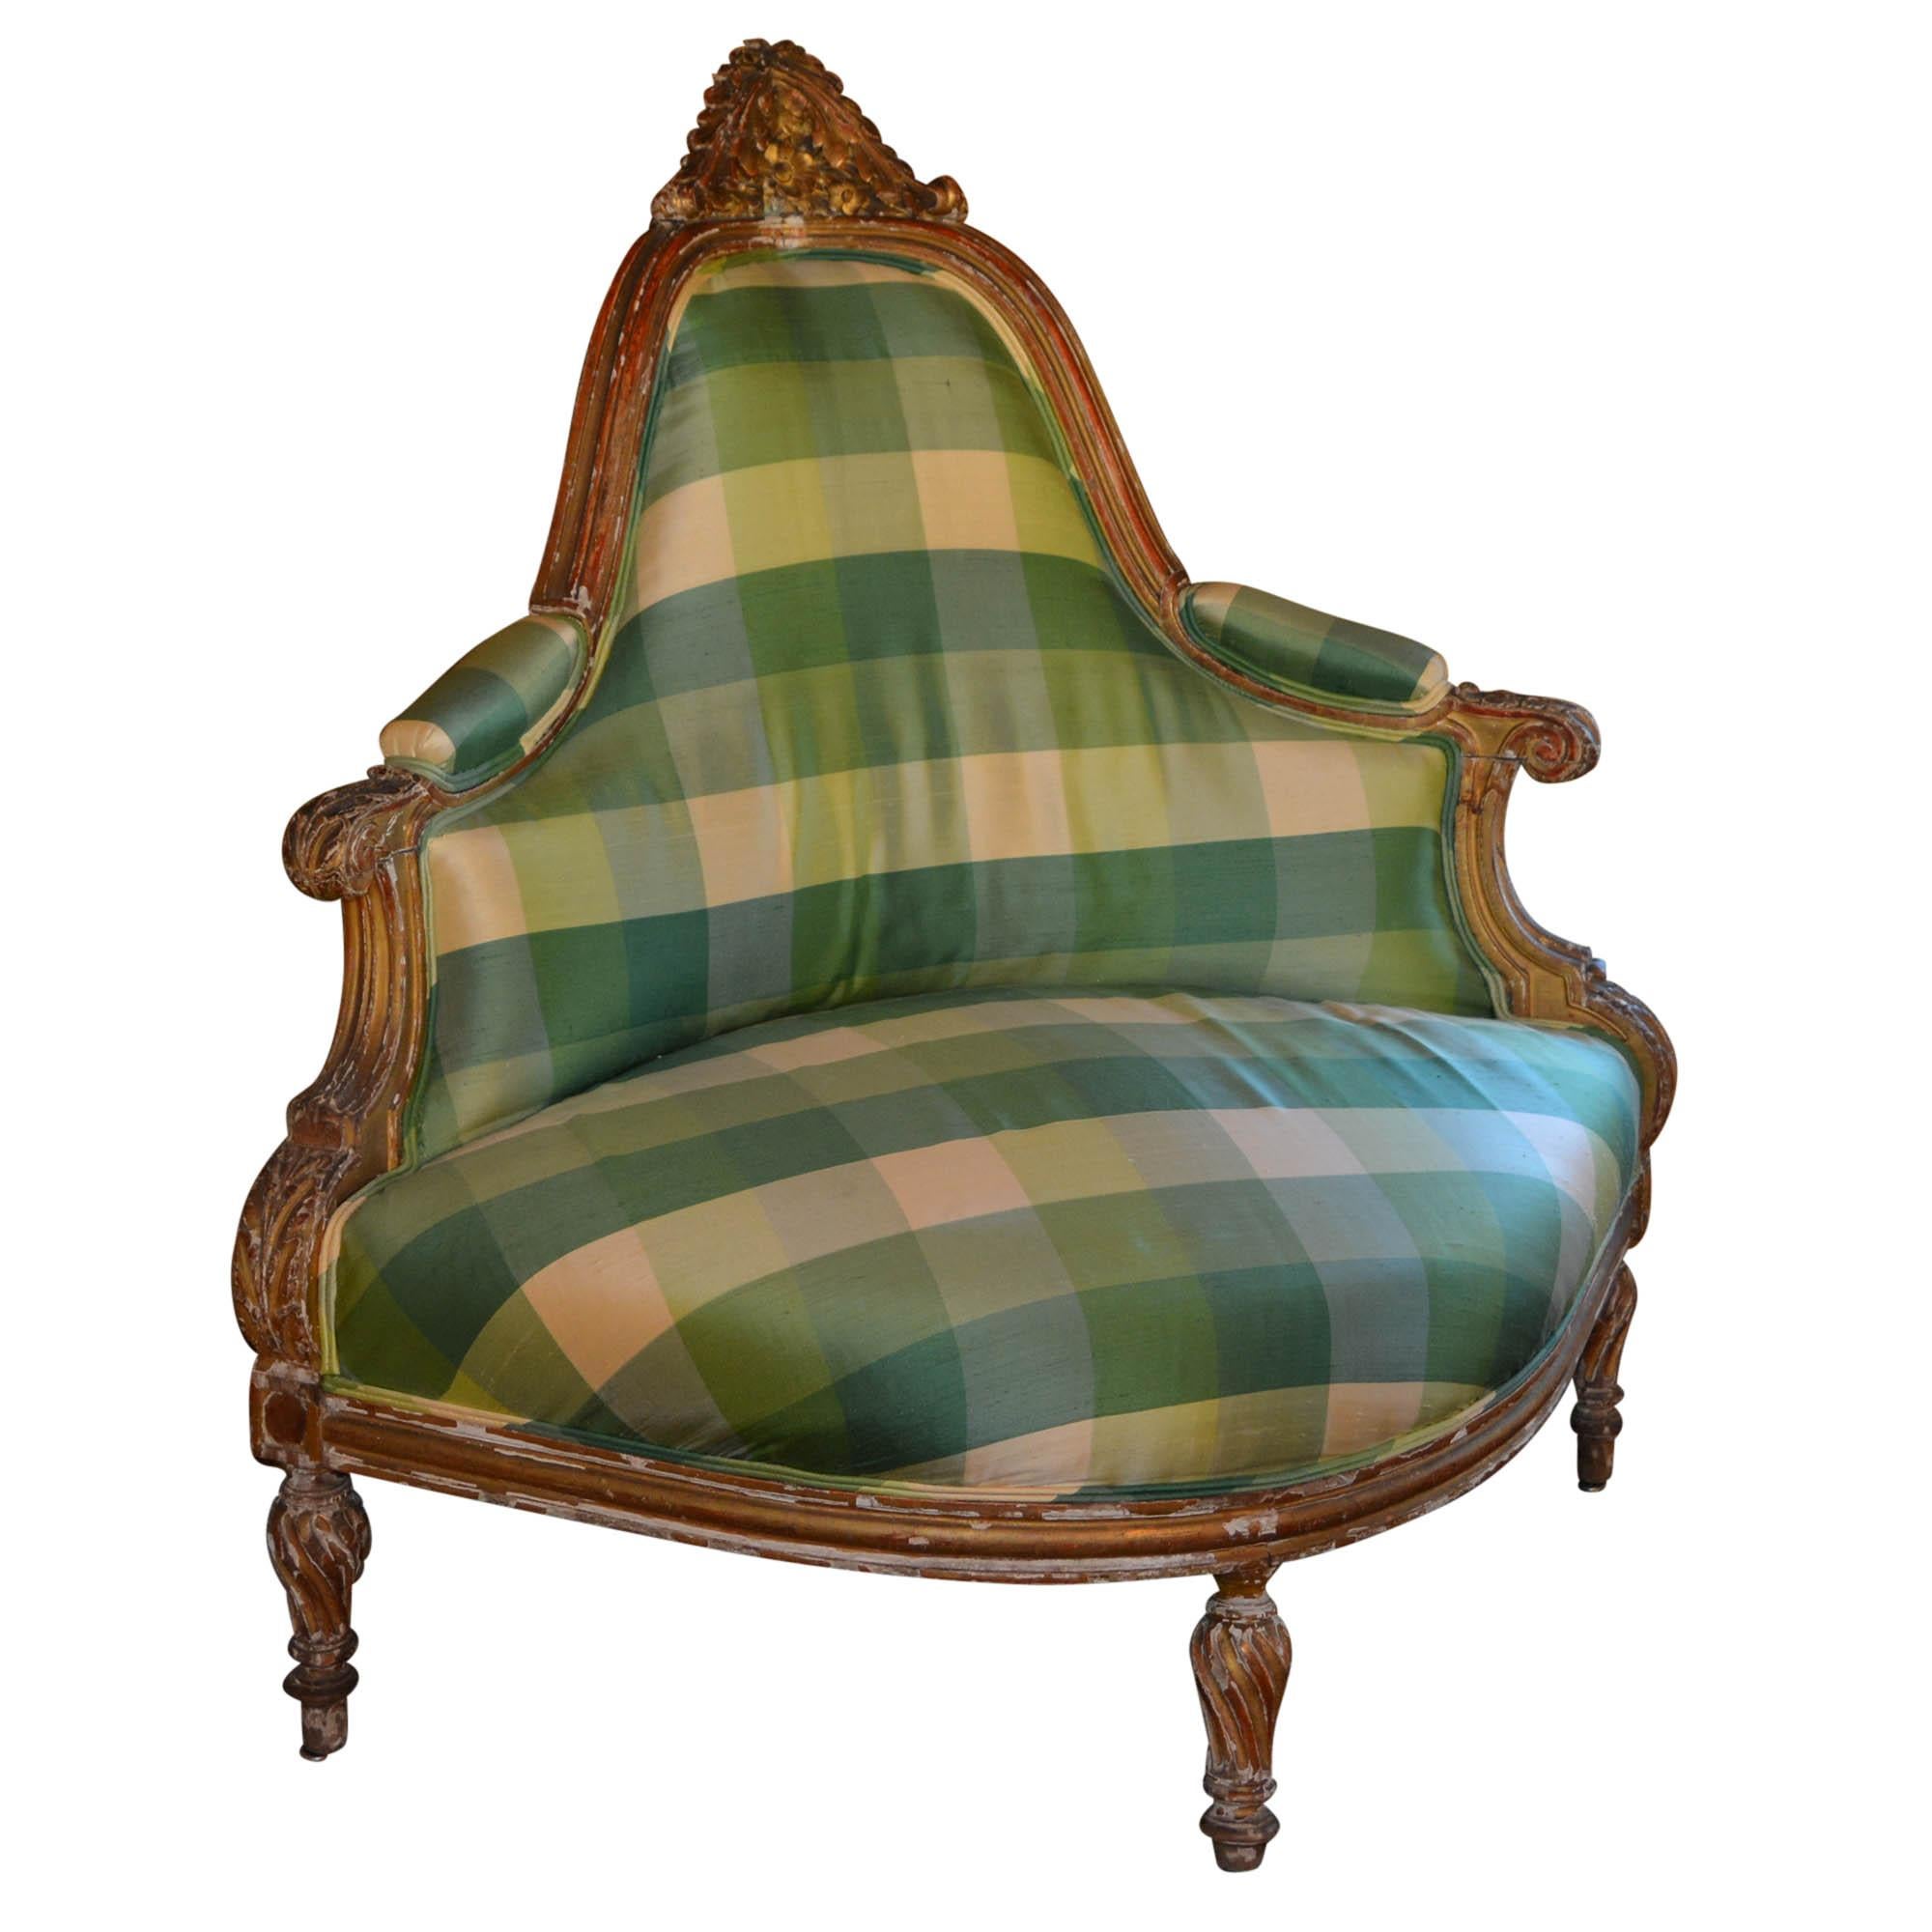 This stunning antique corner chair has been reupholstered in a high quality silk by David Franklin. The aged gold frame is matched beautifully with tones of soft greens and cream in a wide plaid. It is rare to find an antique corner chair with such